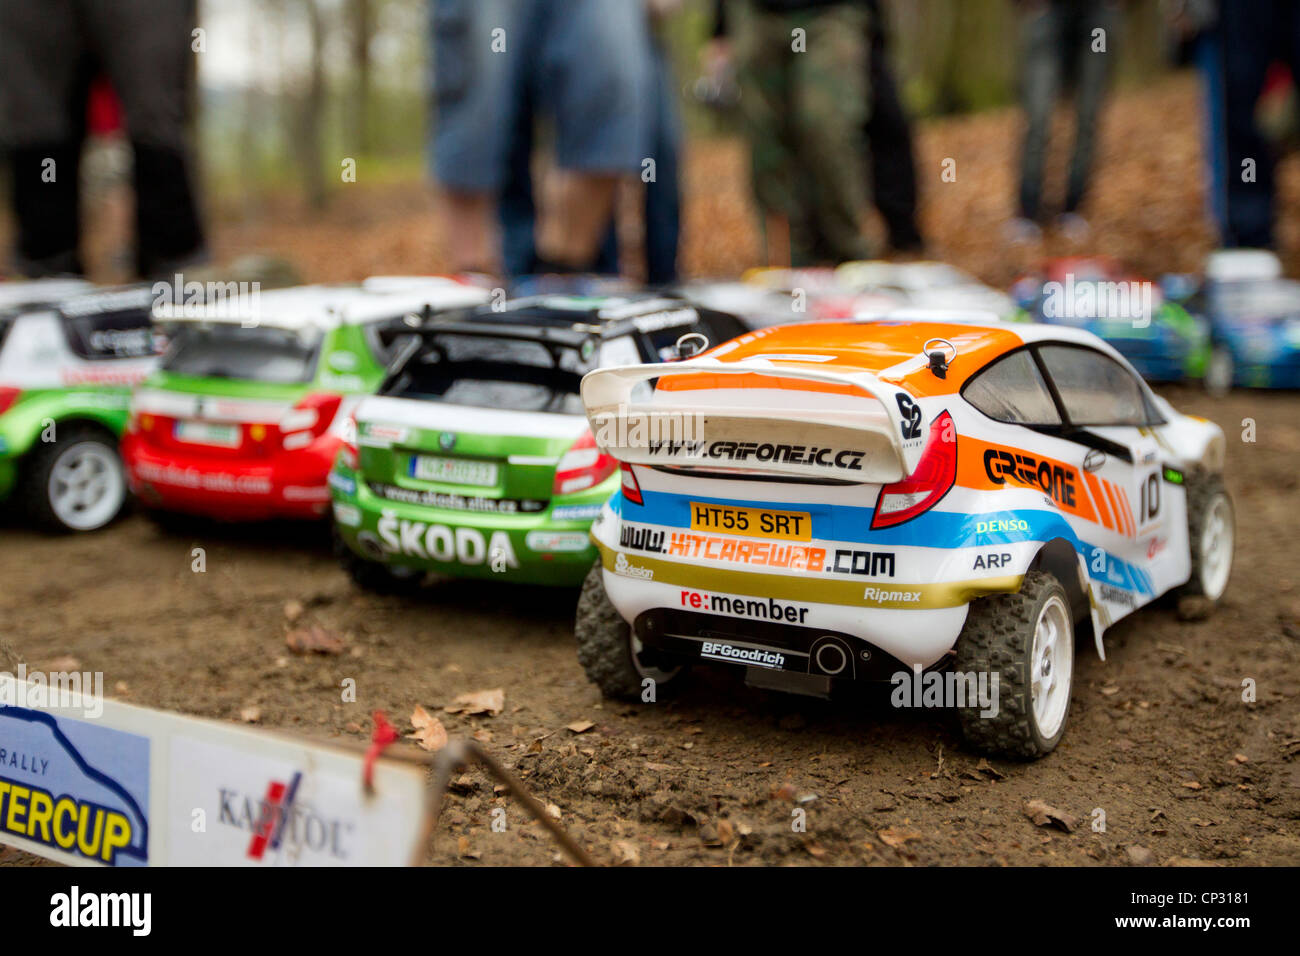 race, races, RC car, model, toy, rallye, Ford Fiesta, remote control,  controlled Stock Photo - Alamy